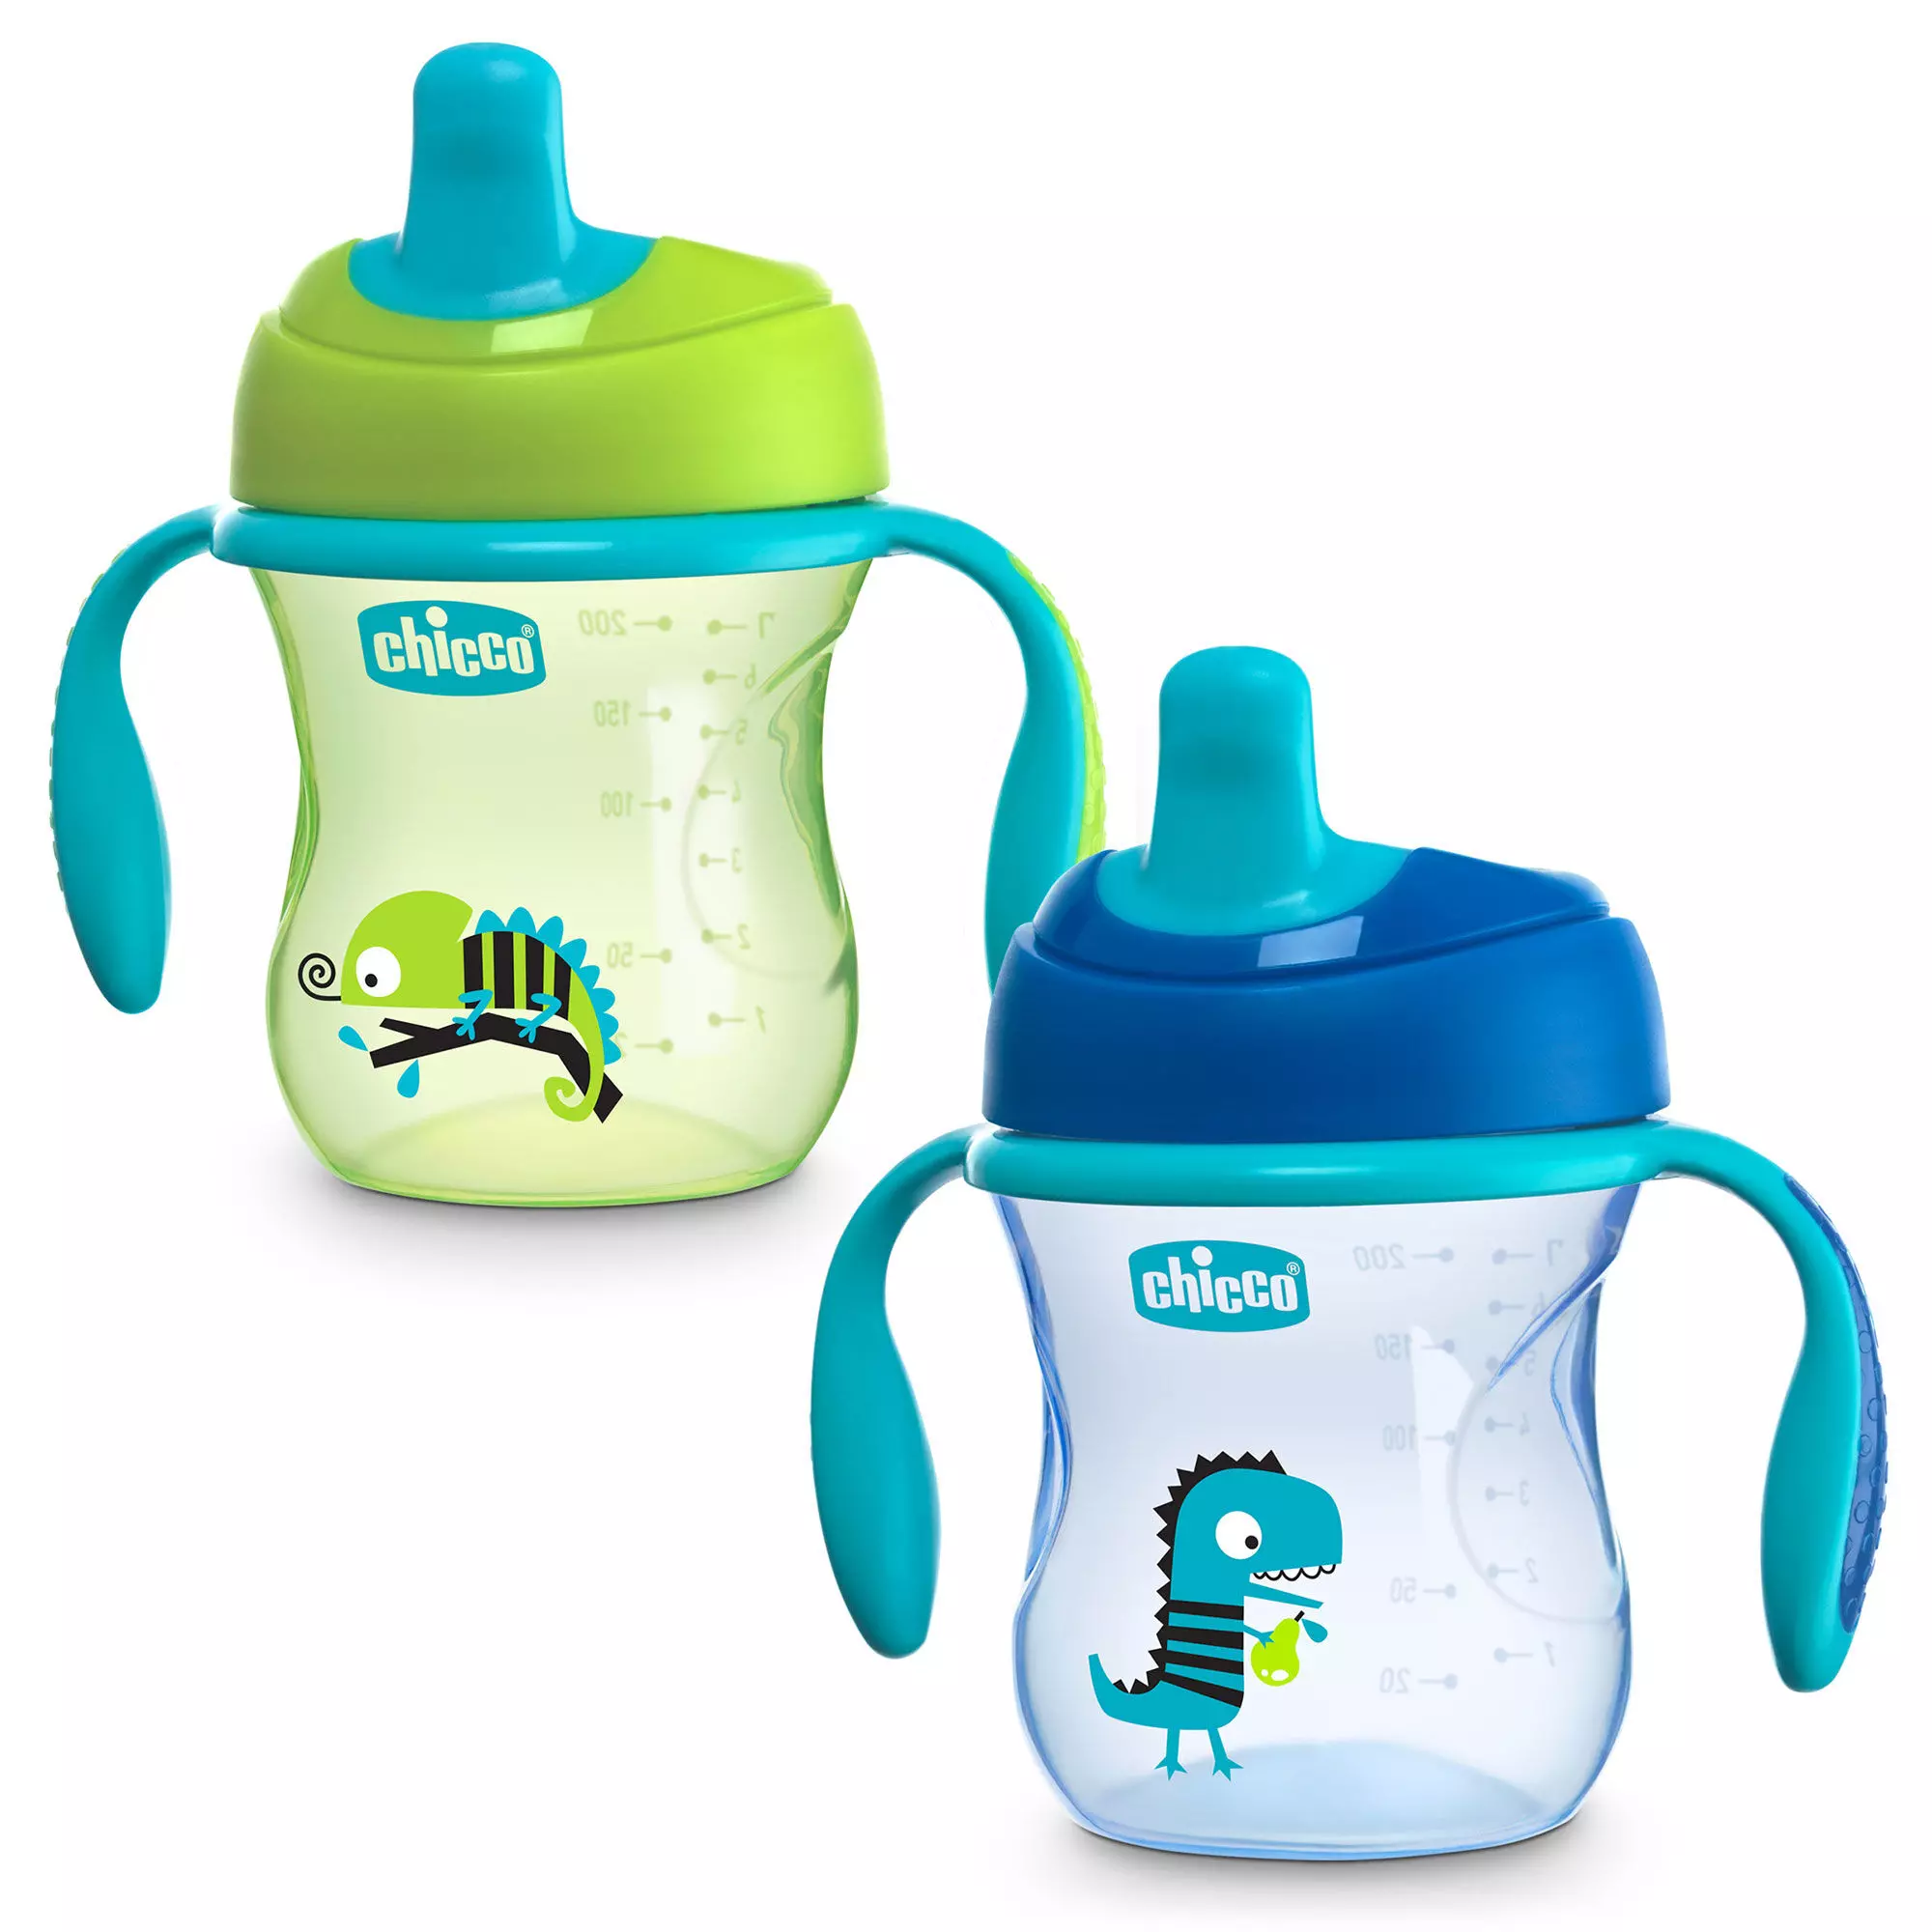 Chicco Semi-Soft Spout Spill-Free Baby Trainer Sippy Cup